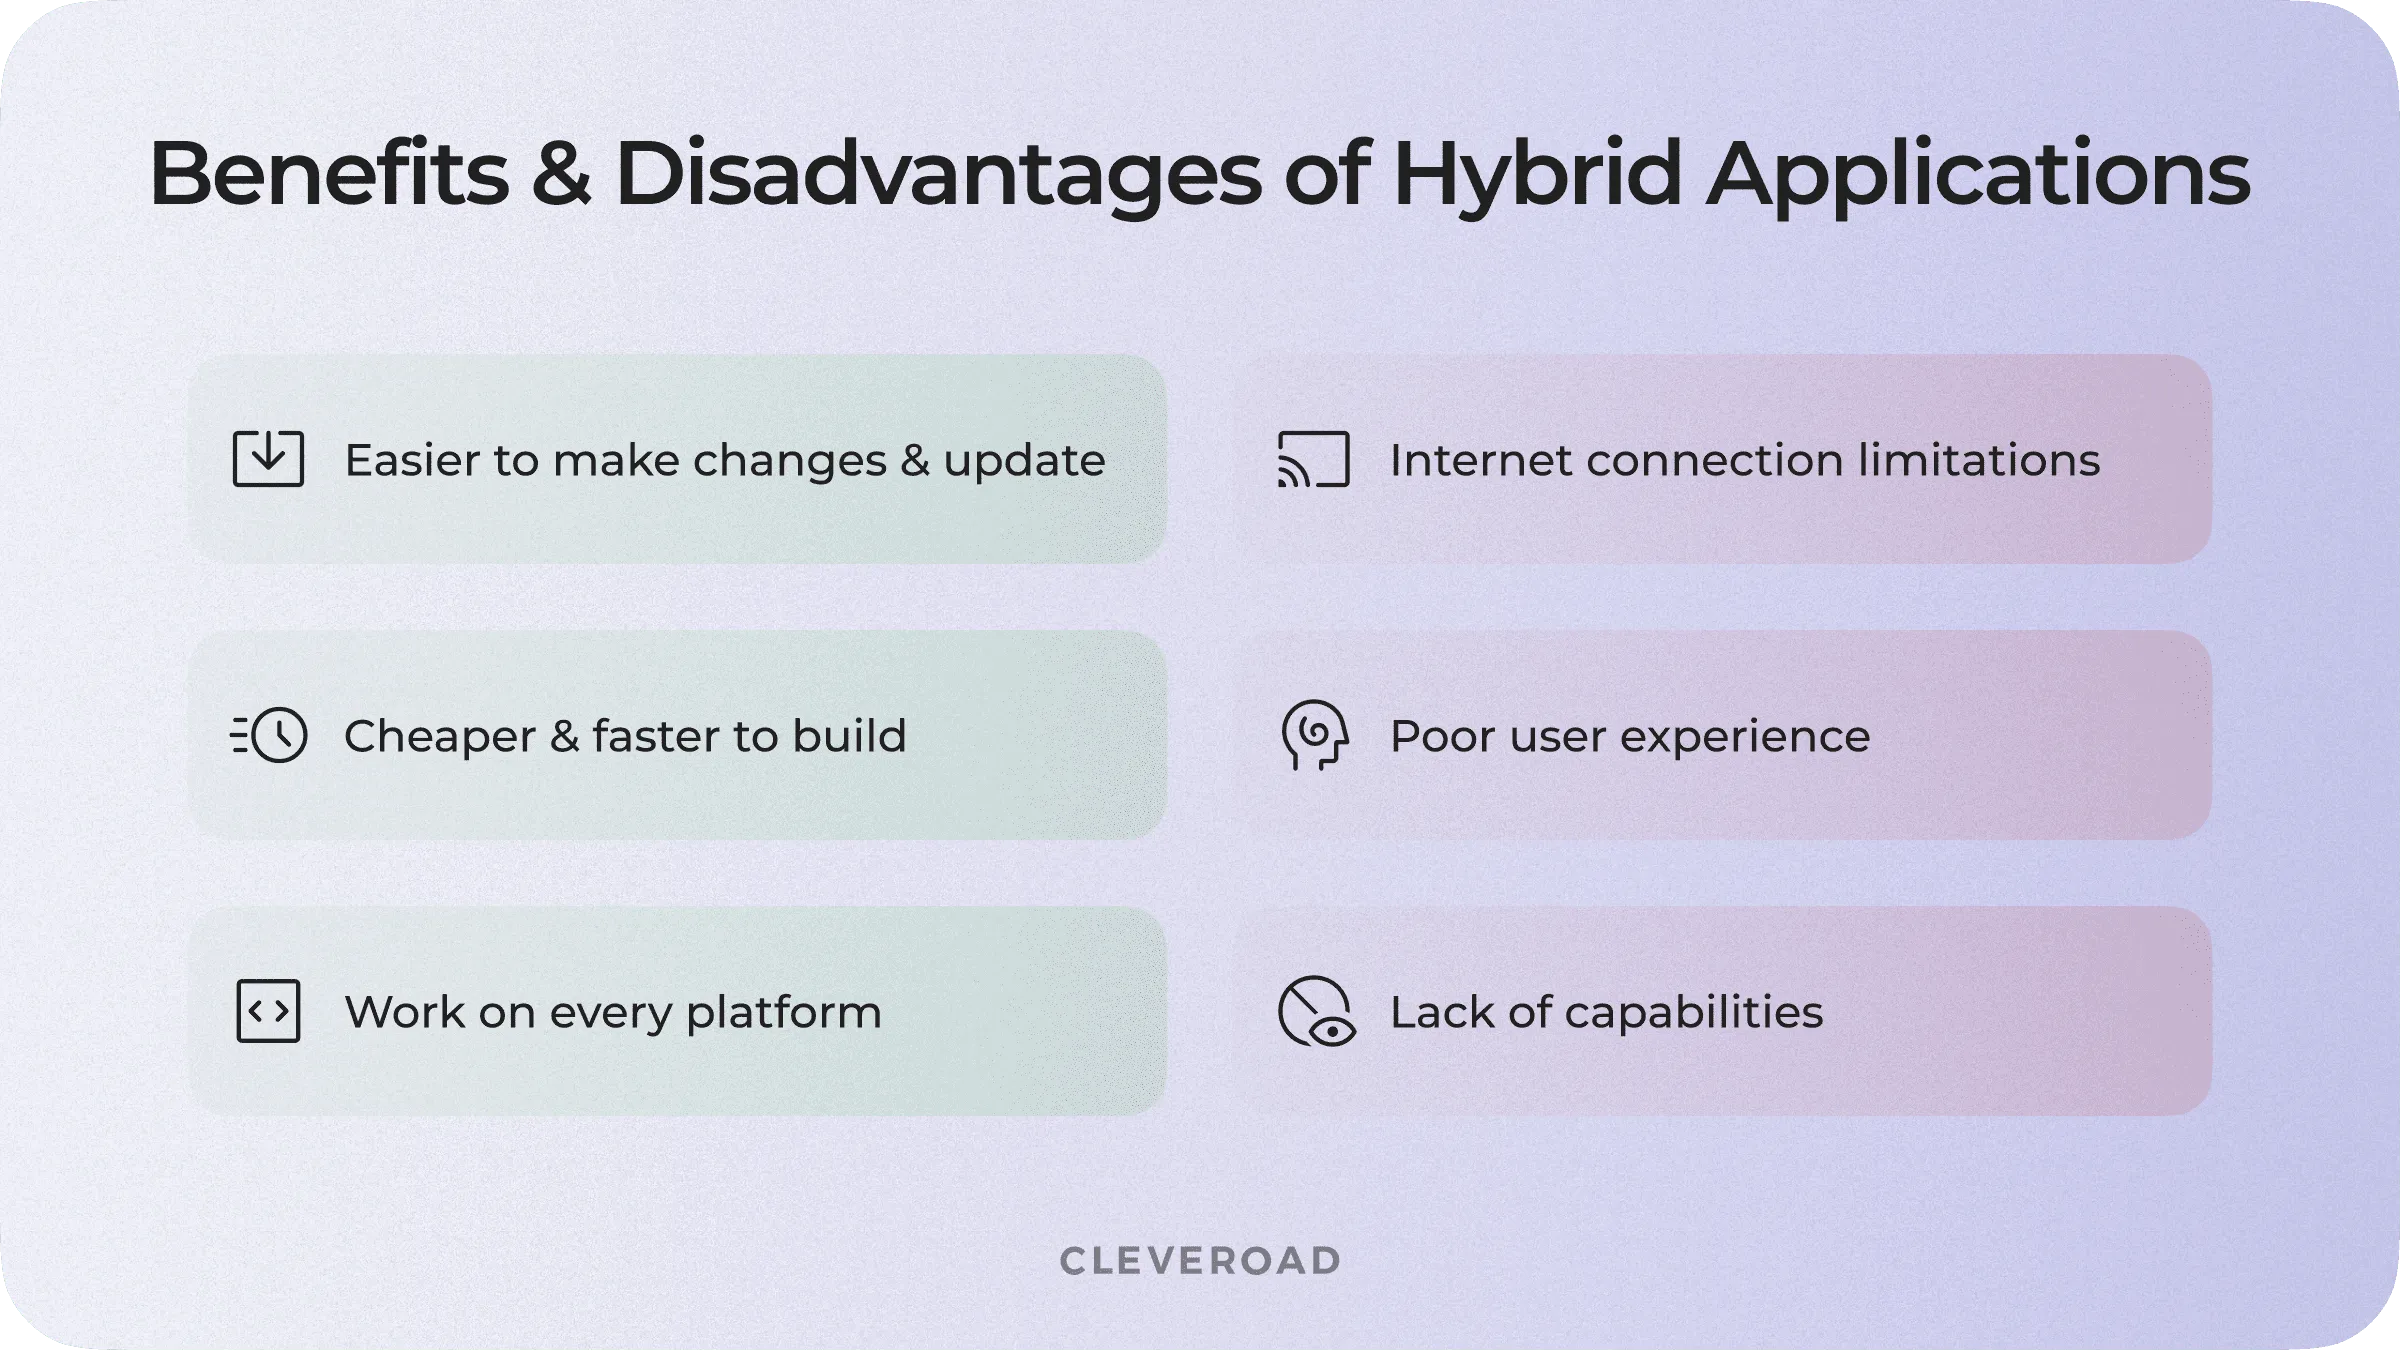 Benefits and disadvantages of hybrid apps